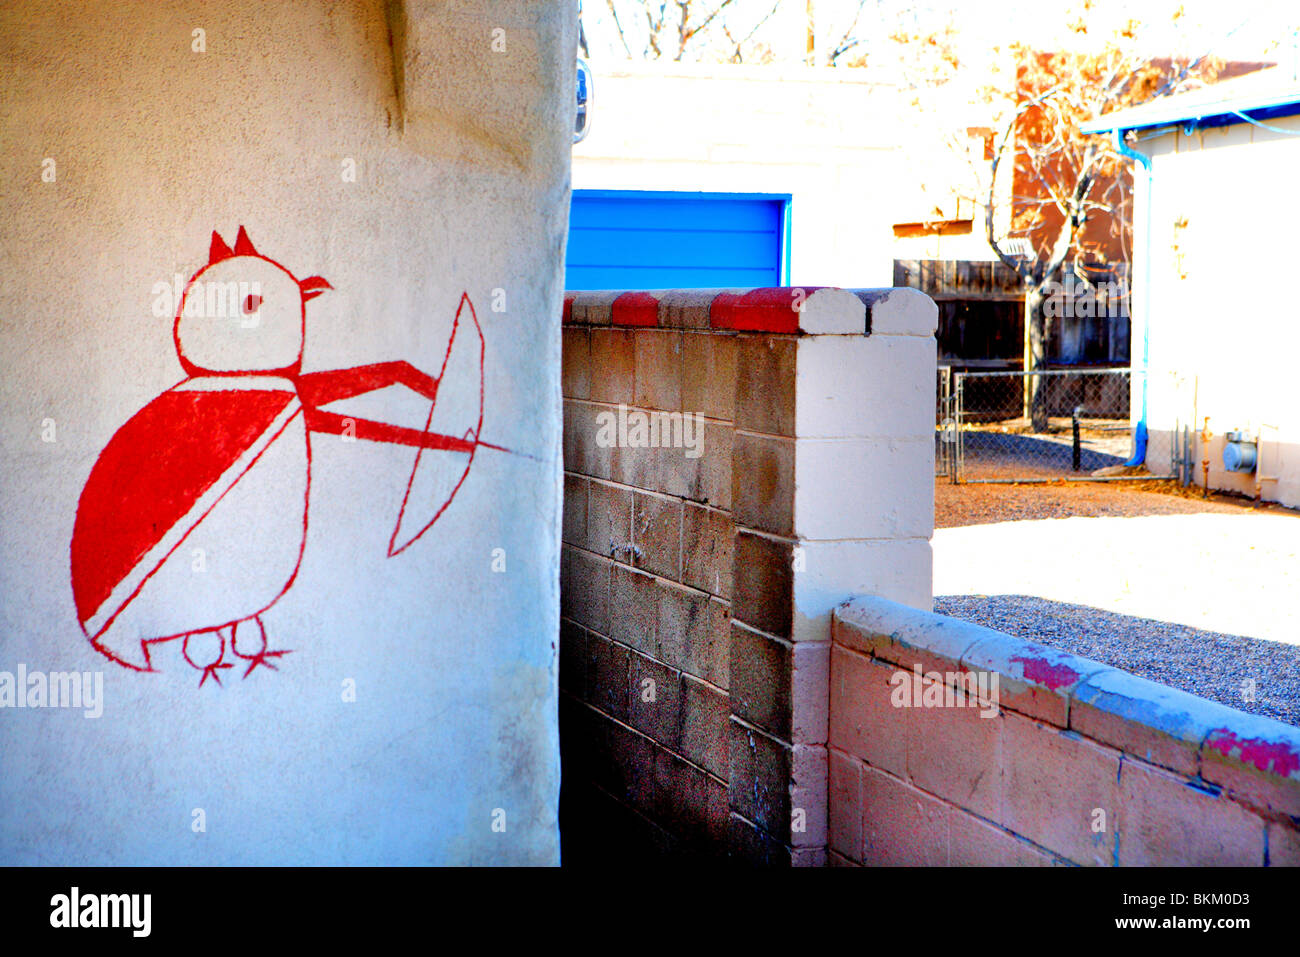 DRAWING ON A BUILDING WALL NEAR OLD TOWN PLAZA IN ALBUQUERQUE, NEW MEXICO, USA  Stock Photo